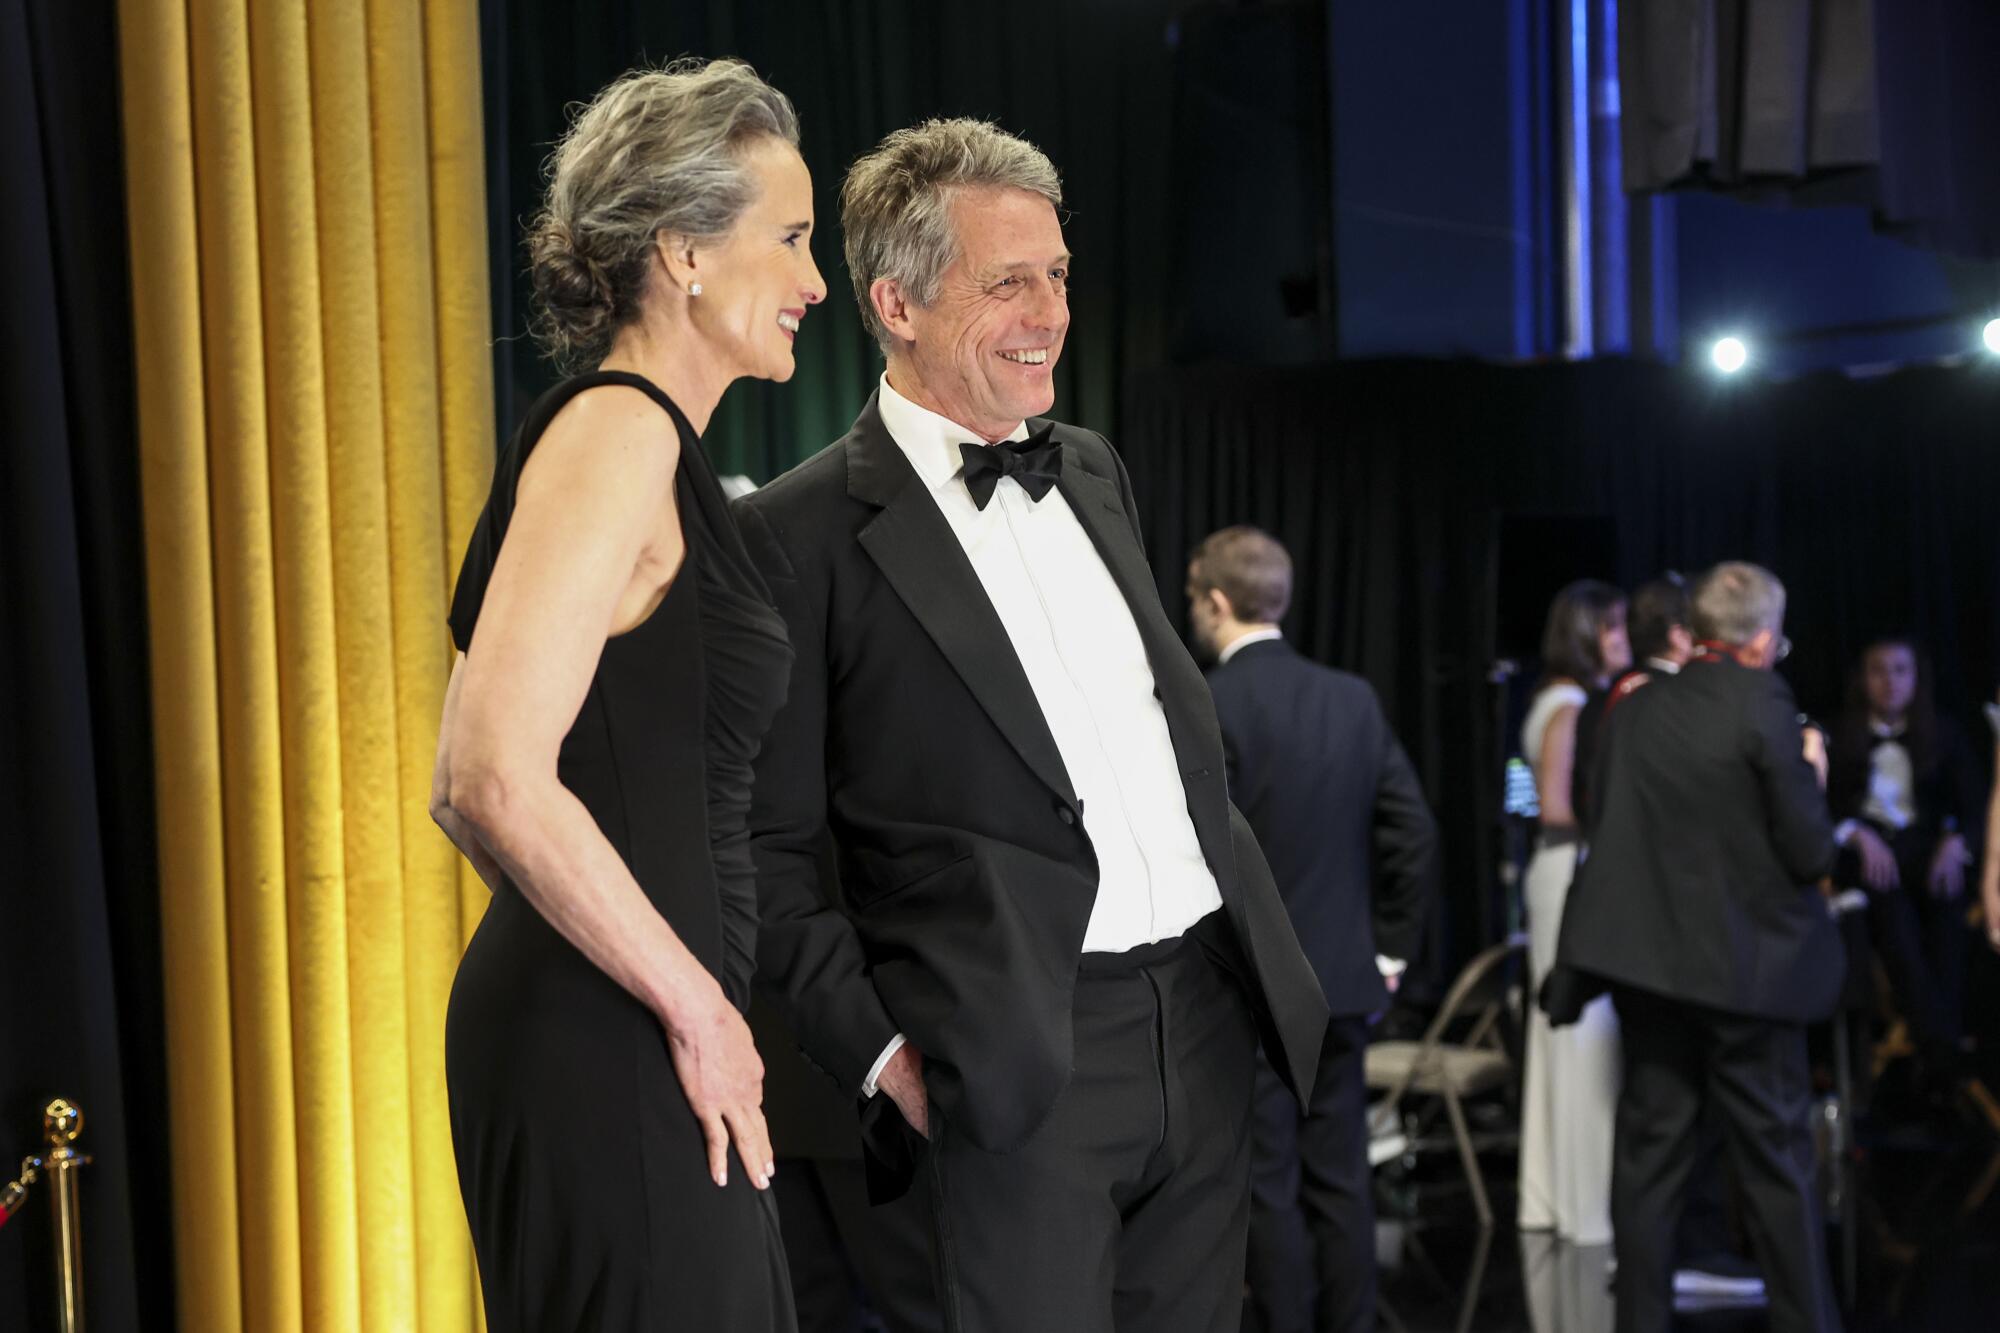 A smiling woman in a gown and a man in a tux backstage at the Oscars.